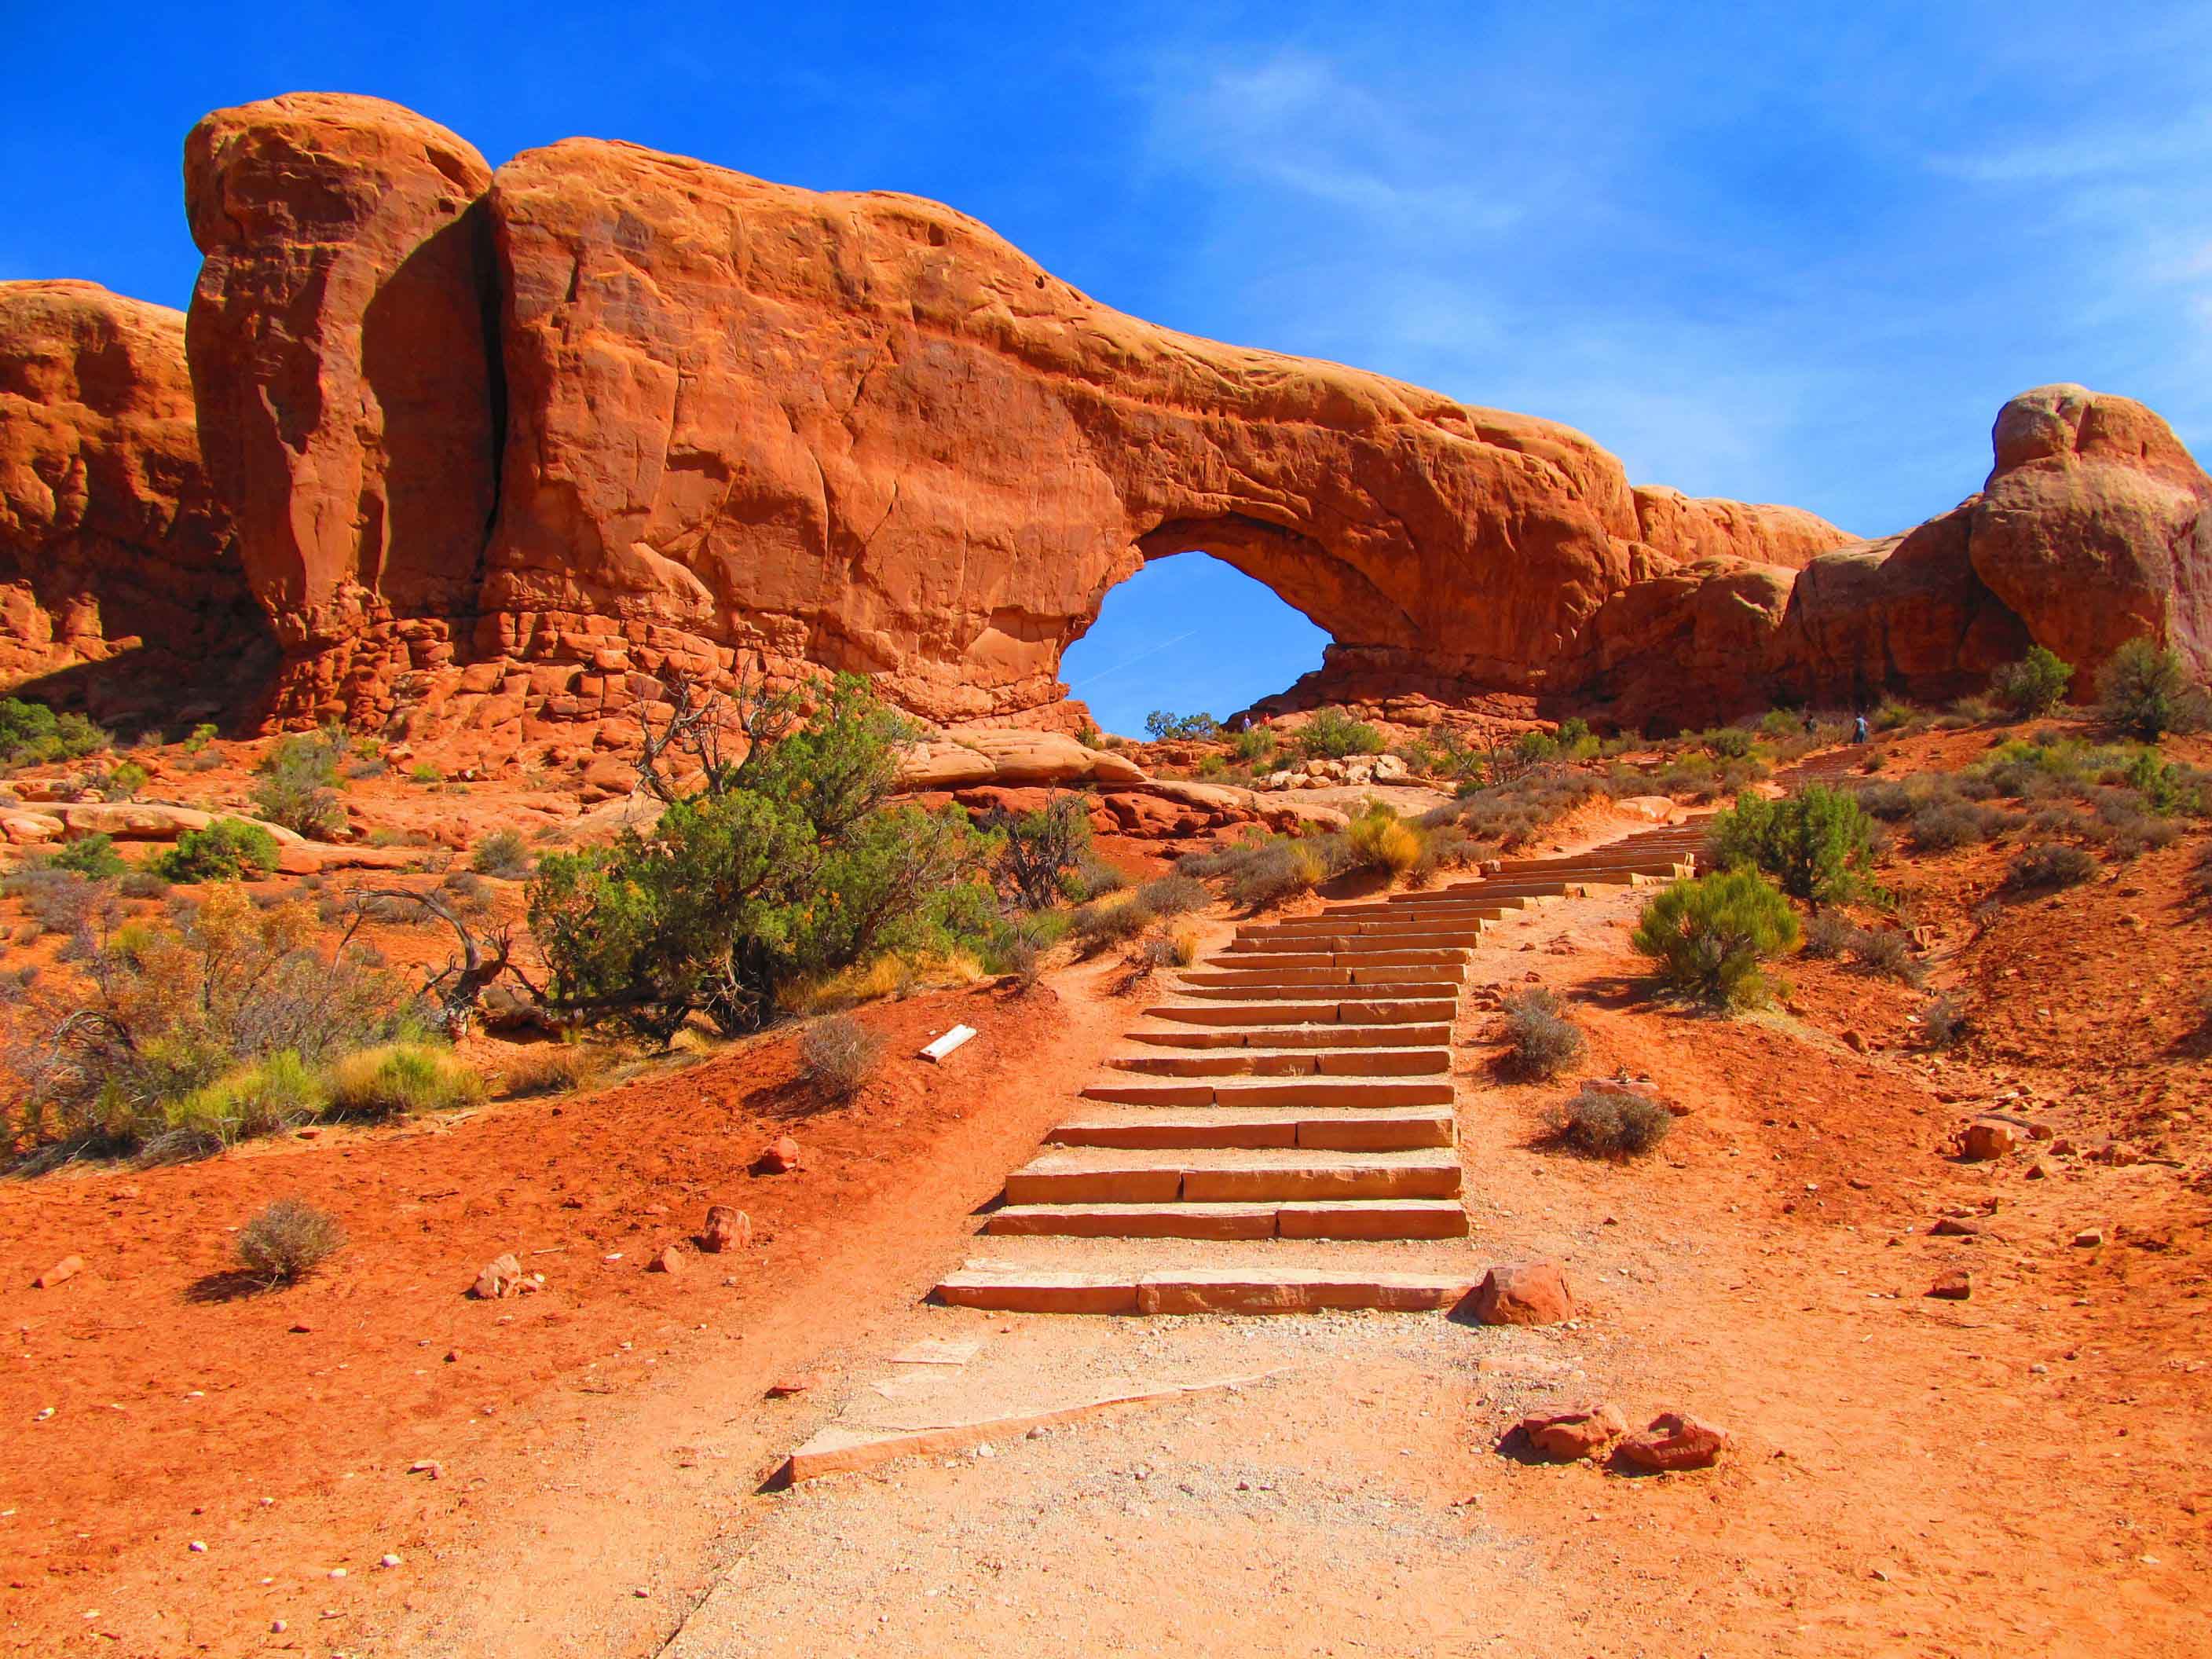 Arches National Park Hd Wallpapers Free Download | New HD ...